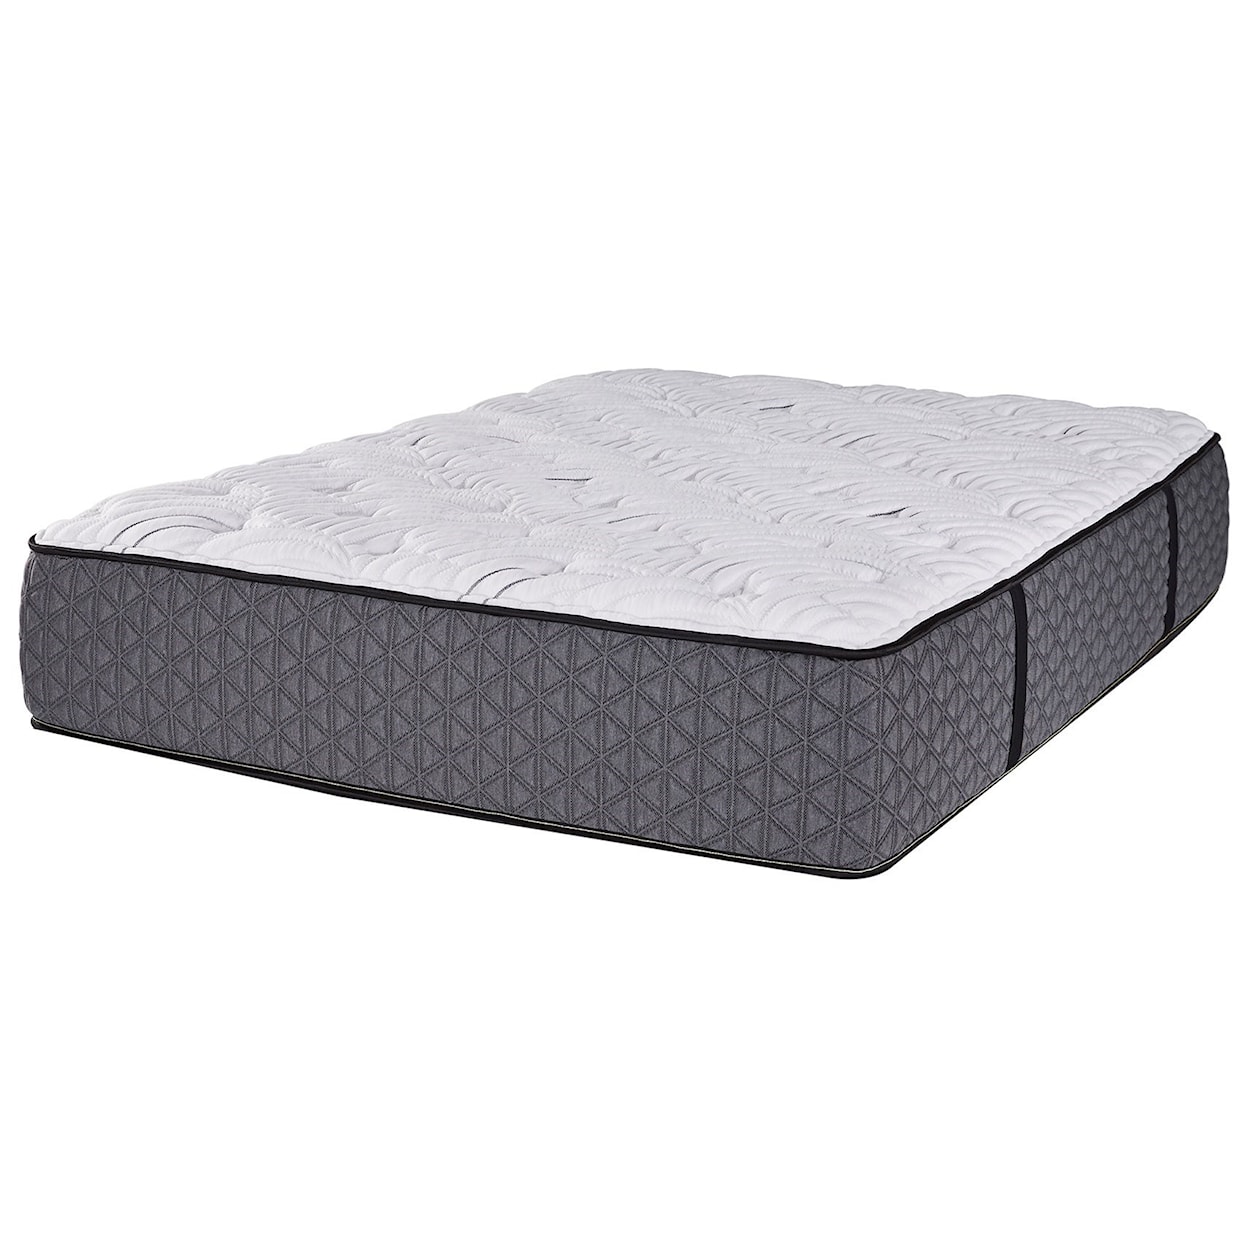 Restonic Stratford Firm 2 Sided King Firm 2-Sided Mattress